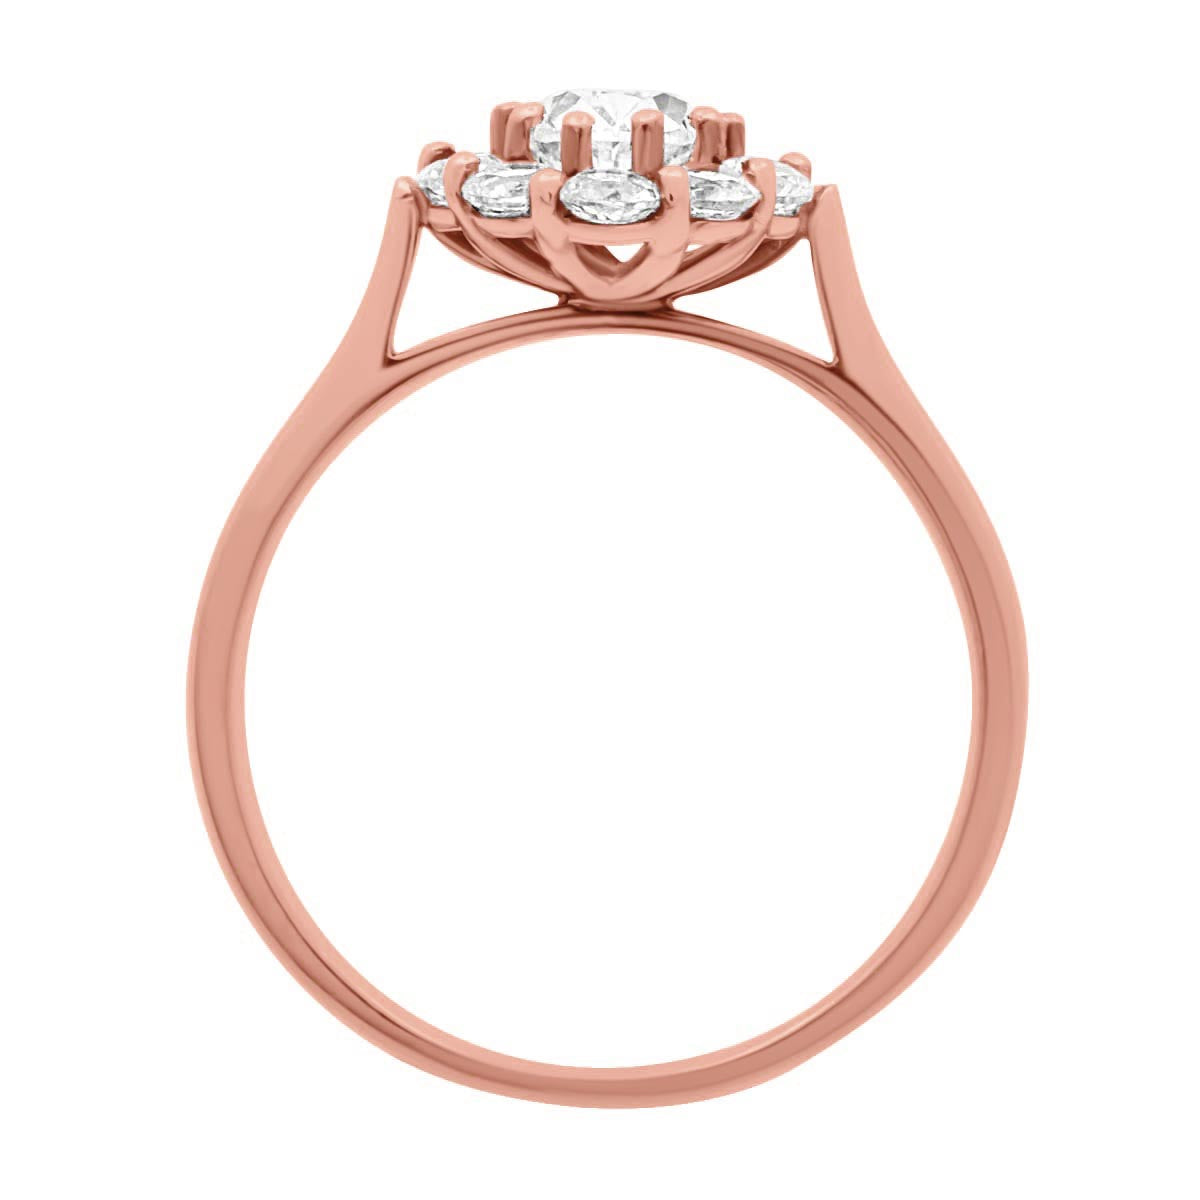 Cluster Engagement Ring in rose gold standing upright